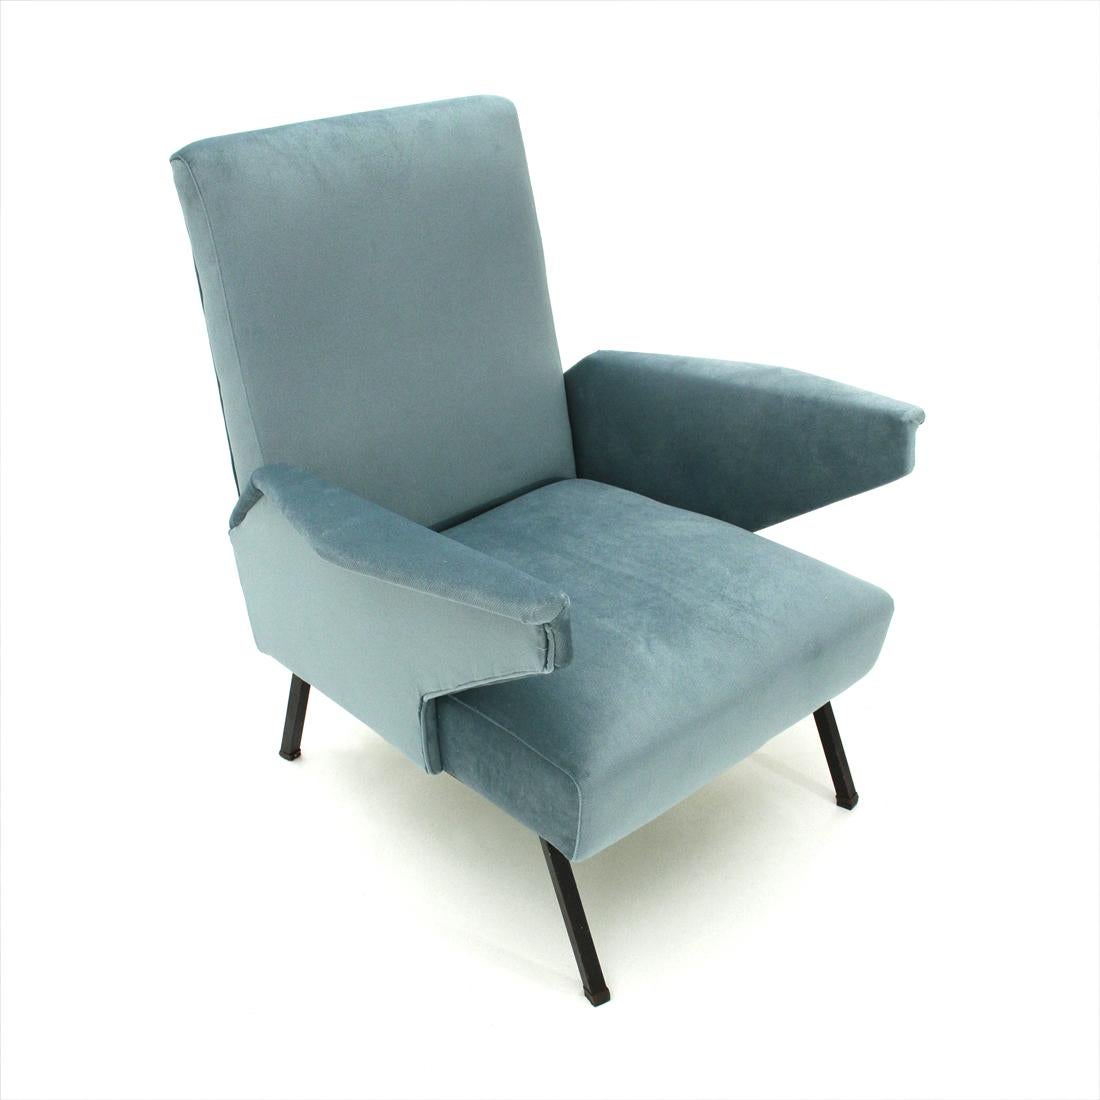 IItalian manufacturing armchair produced by Bonino in the 1960s.
Wooden structure padded and lined with new light blue velvet fabric.
Armrests with geometric lines.
Foot in black painted metal.
Good general conditions.

Dimensions: Width 75